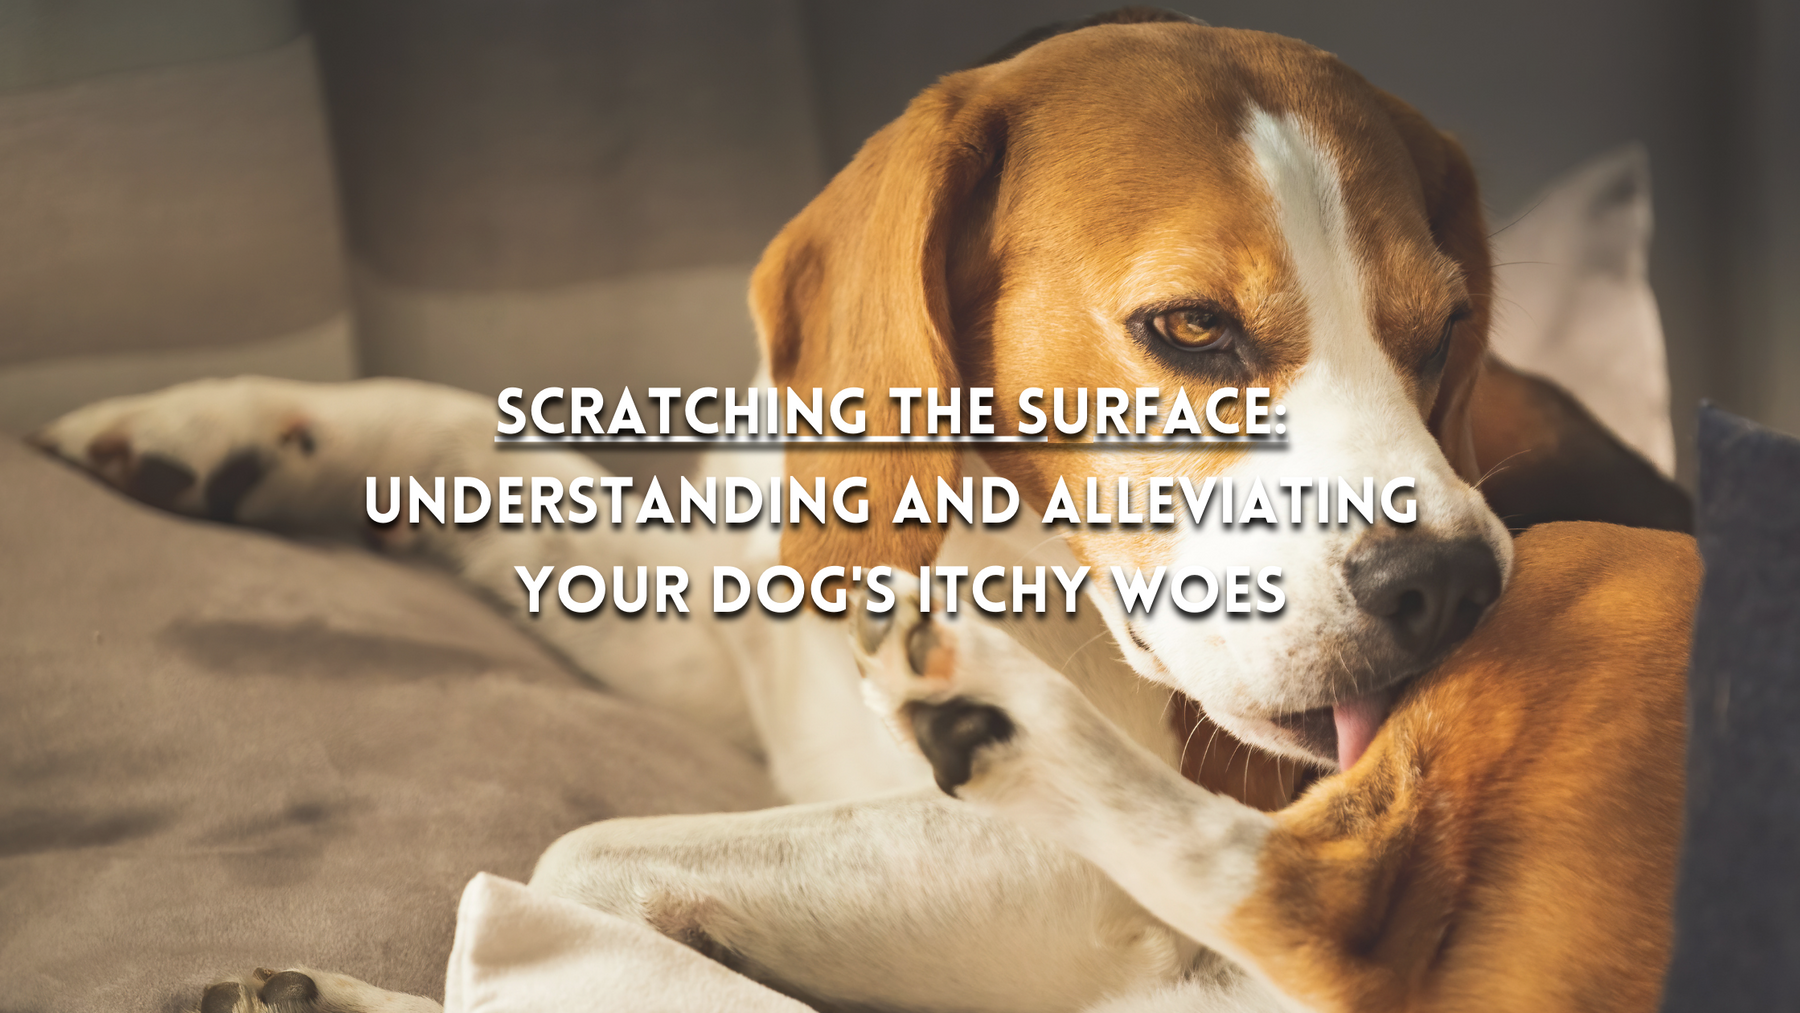 Scratching the Surface: Understanding and Alleviating Your Dog's Itchy Woes